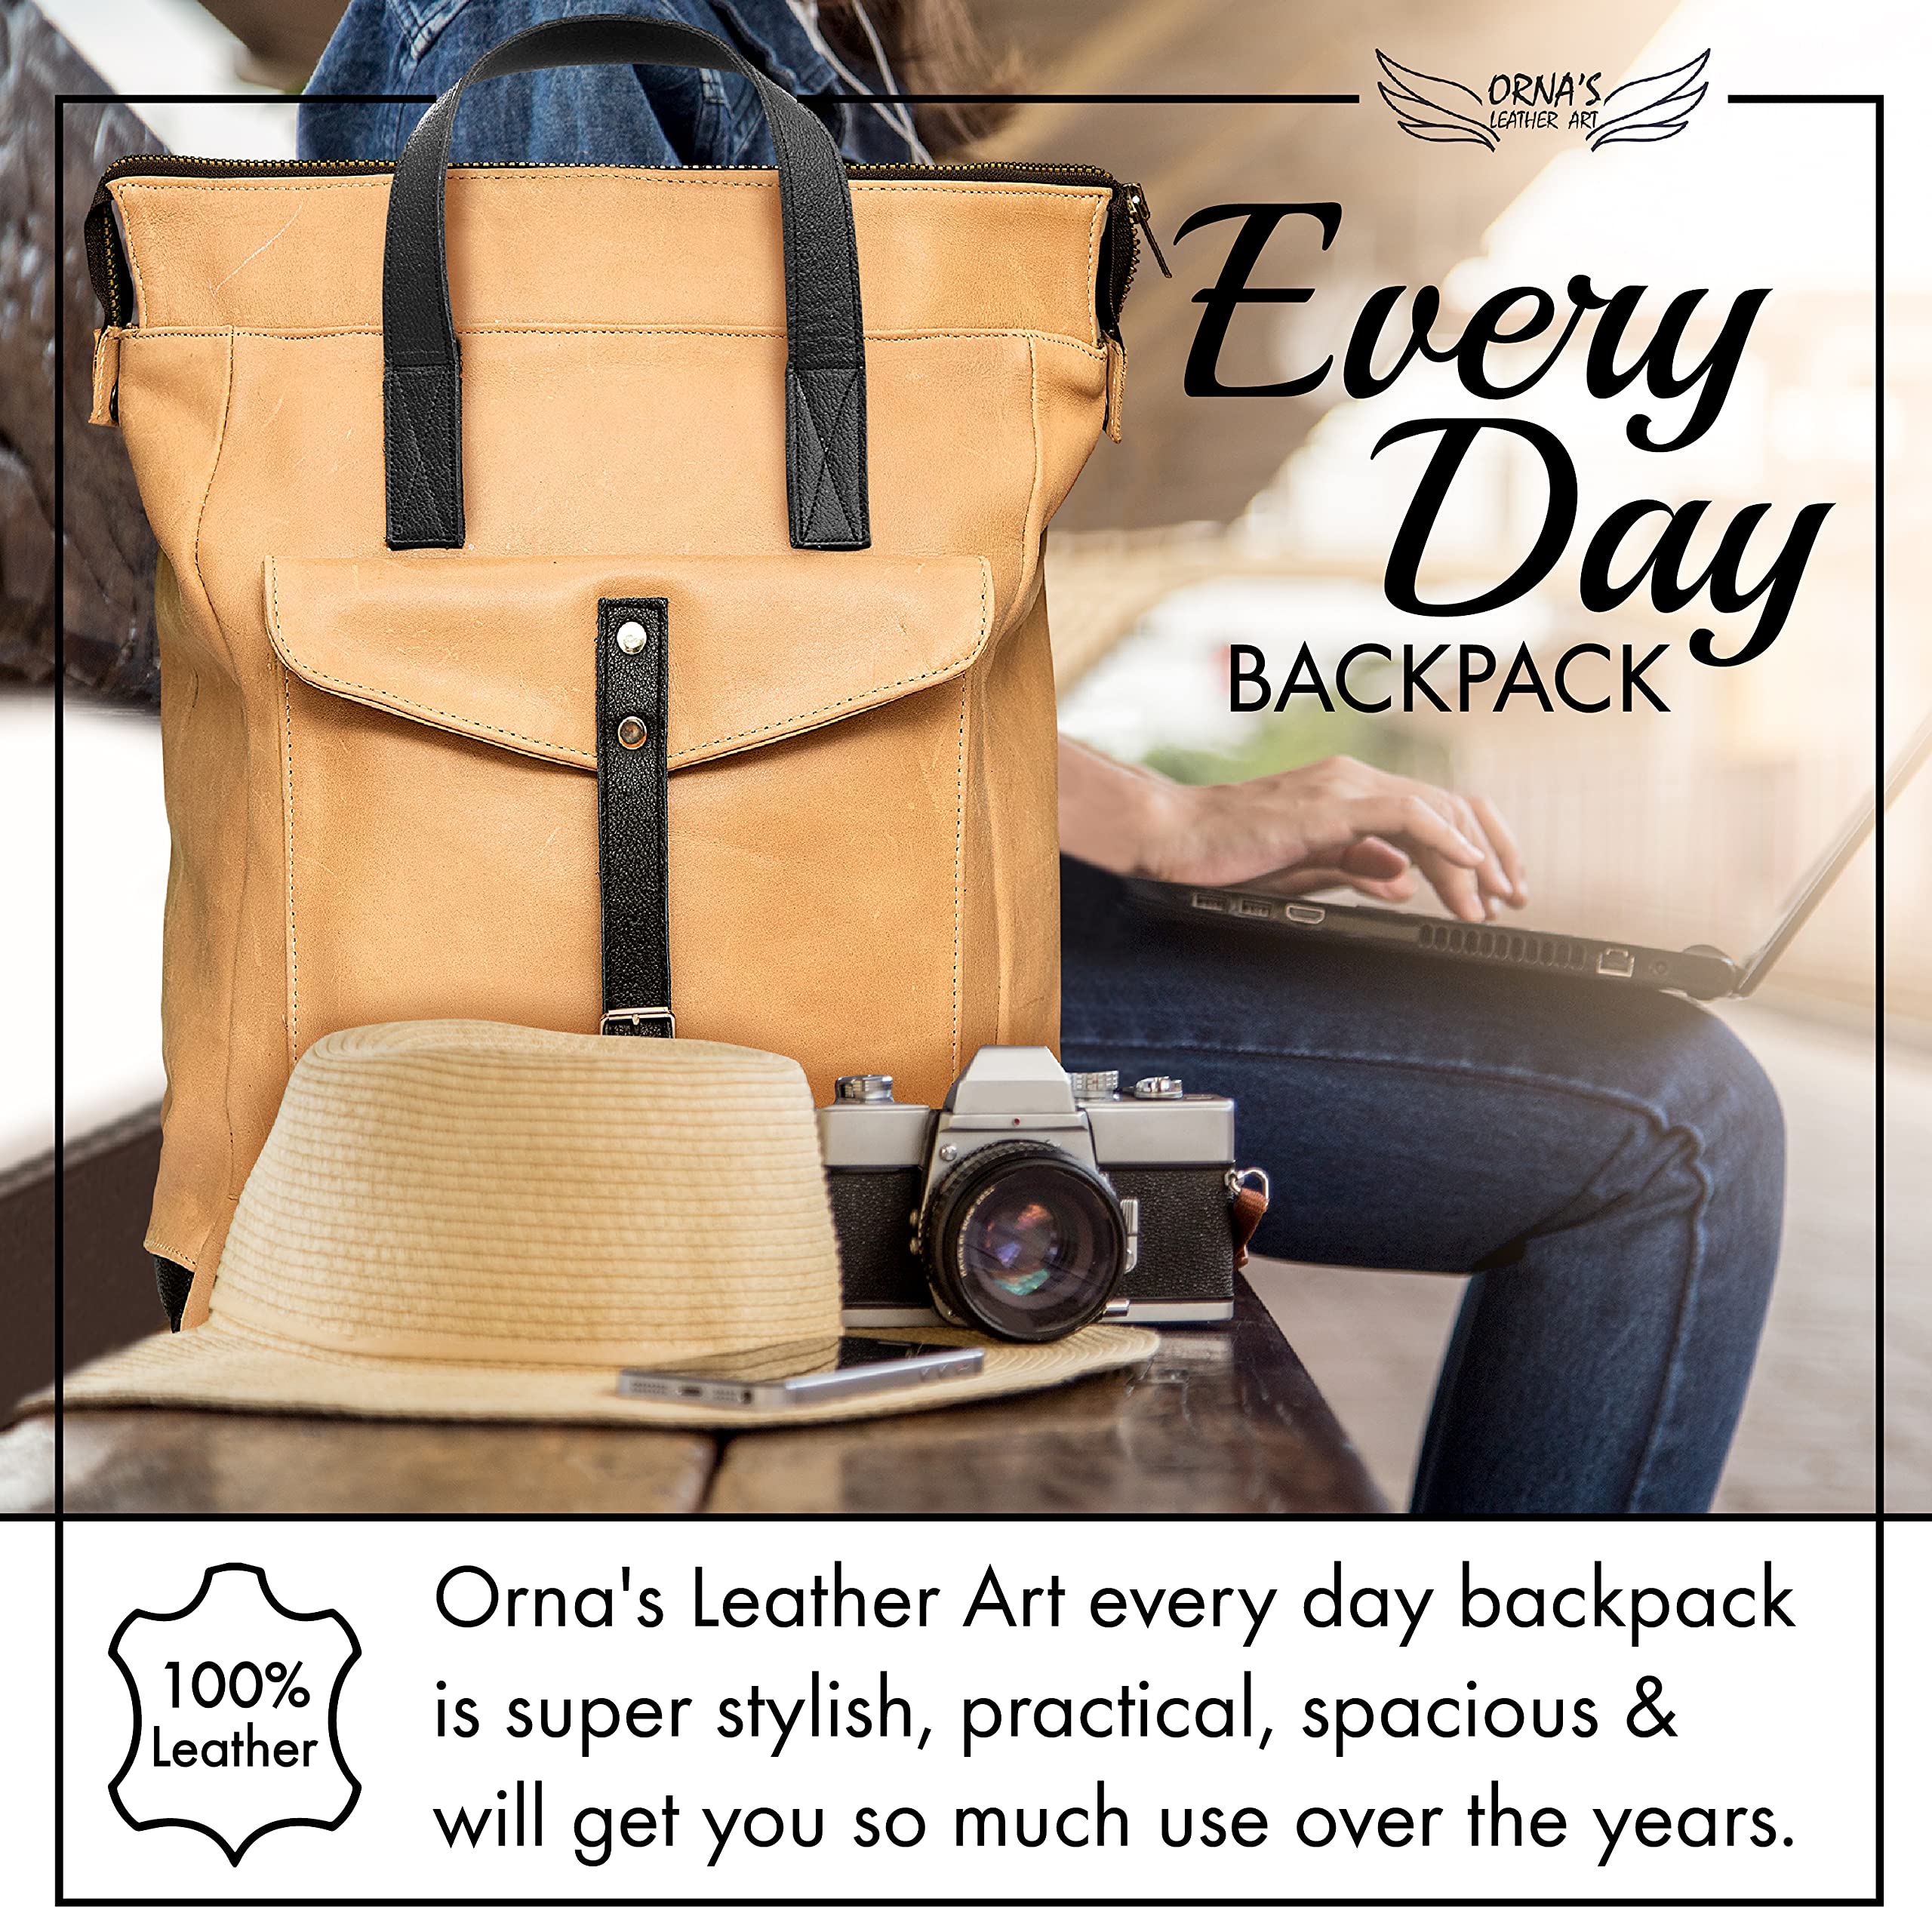 ORNA'S LEATHER ART | SWAN Everyday leather backpack for Women. Practical, Stylish and Spacious Women’s Bag. Real Leather in A Chic Backpack And Contemporary Design, (SAND)